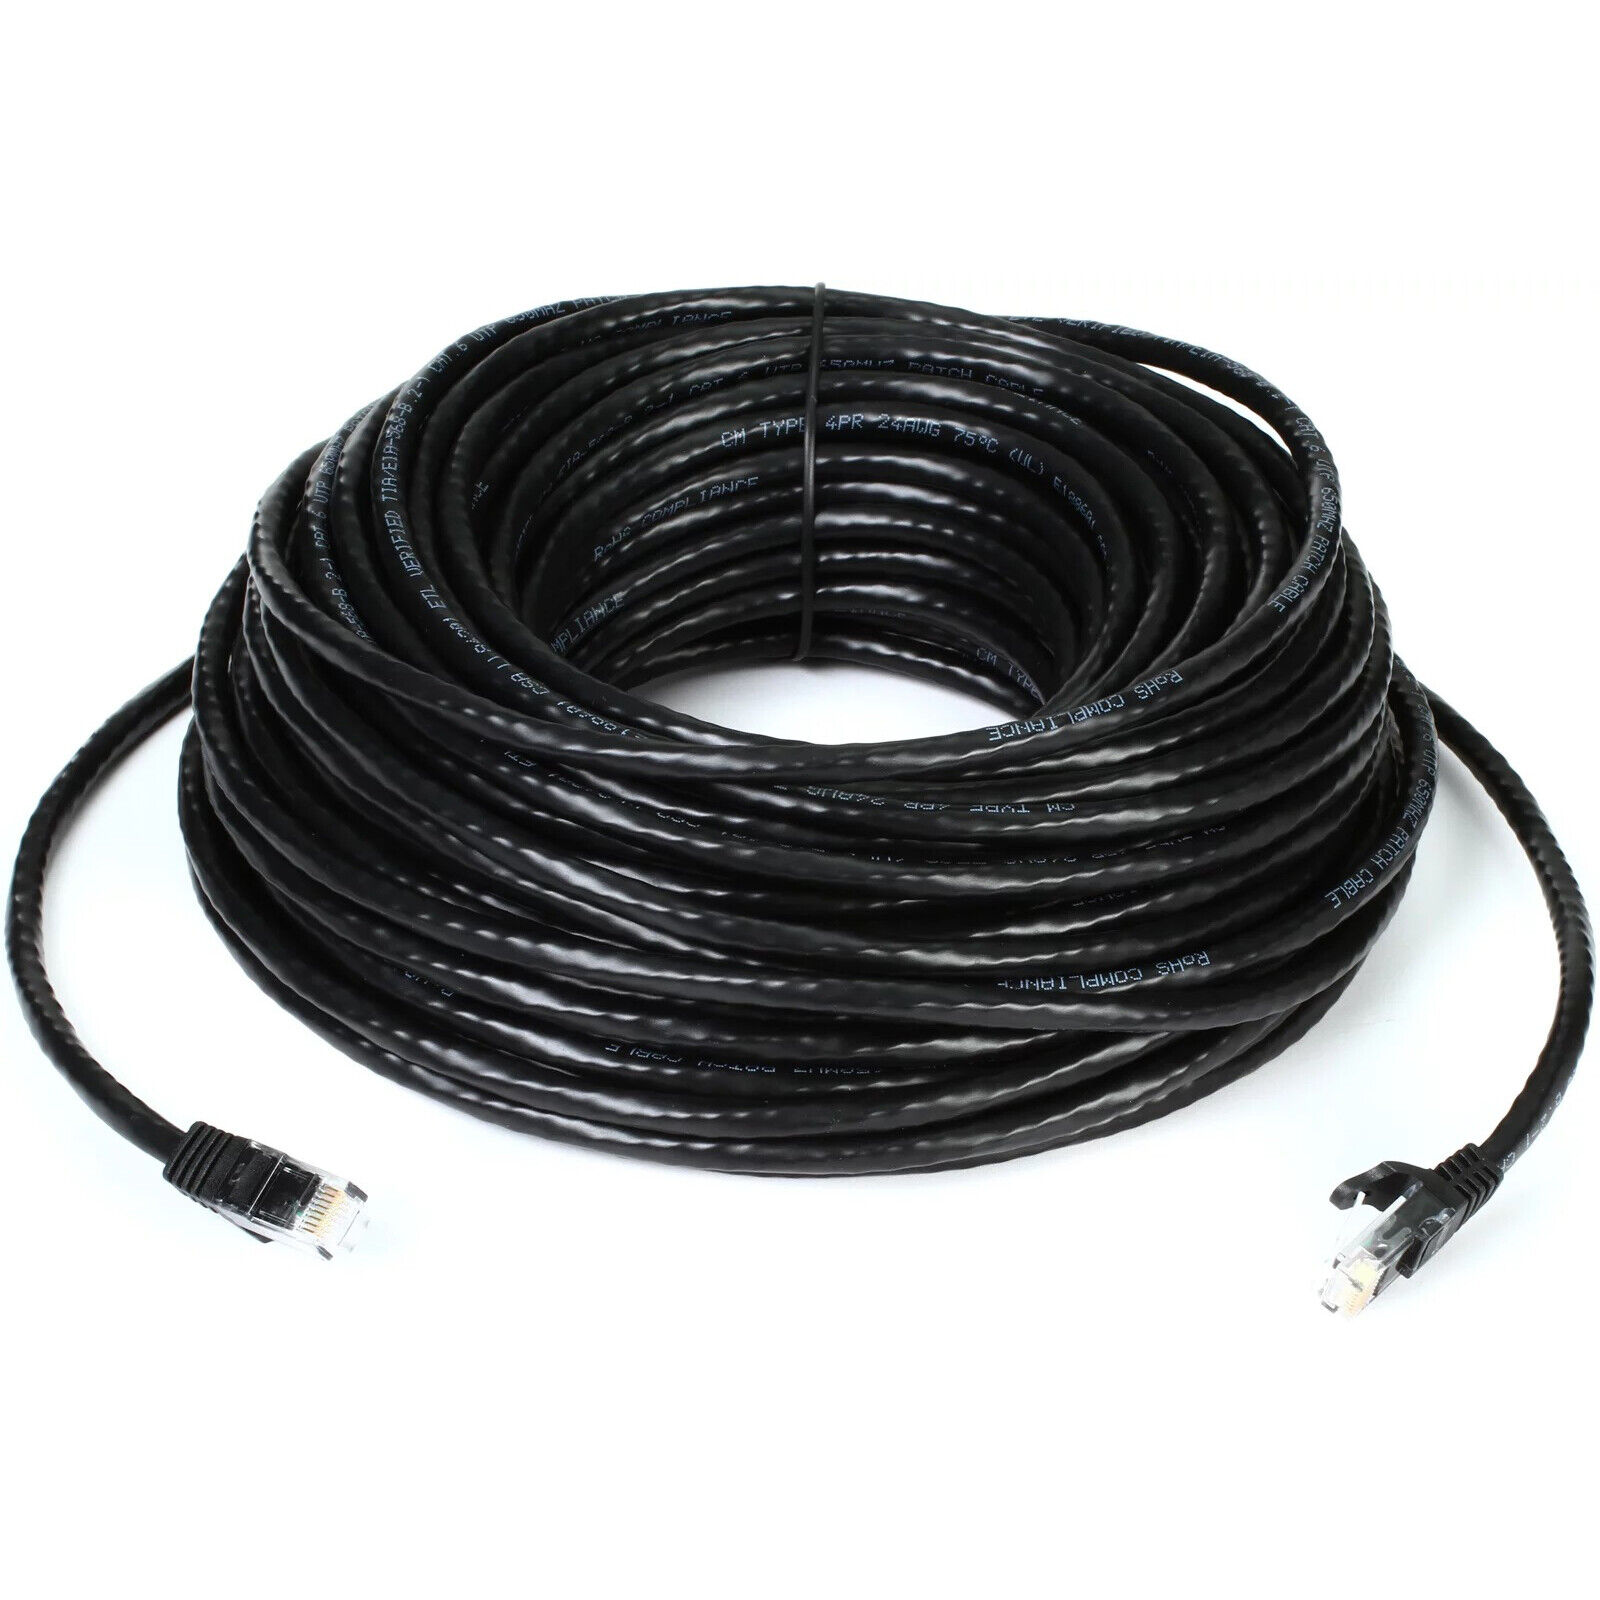 100FT Cat6 High Speed Network IP PoE Switch Ethernet Cable Waterproof RJ45 Cord